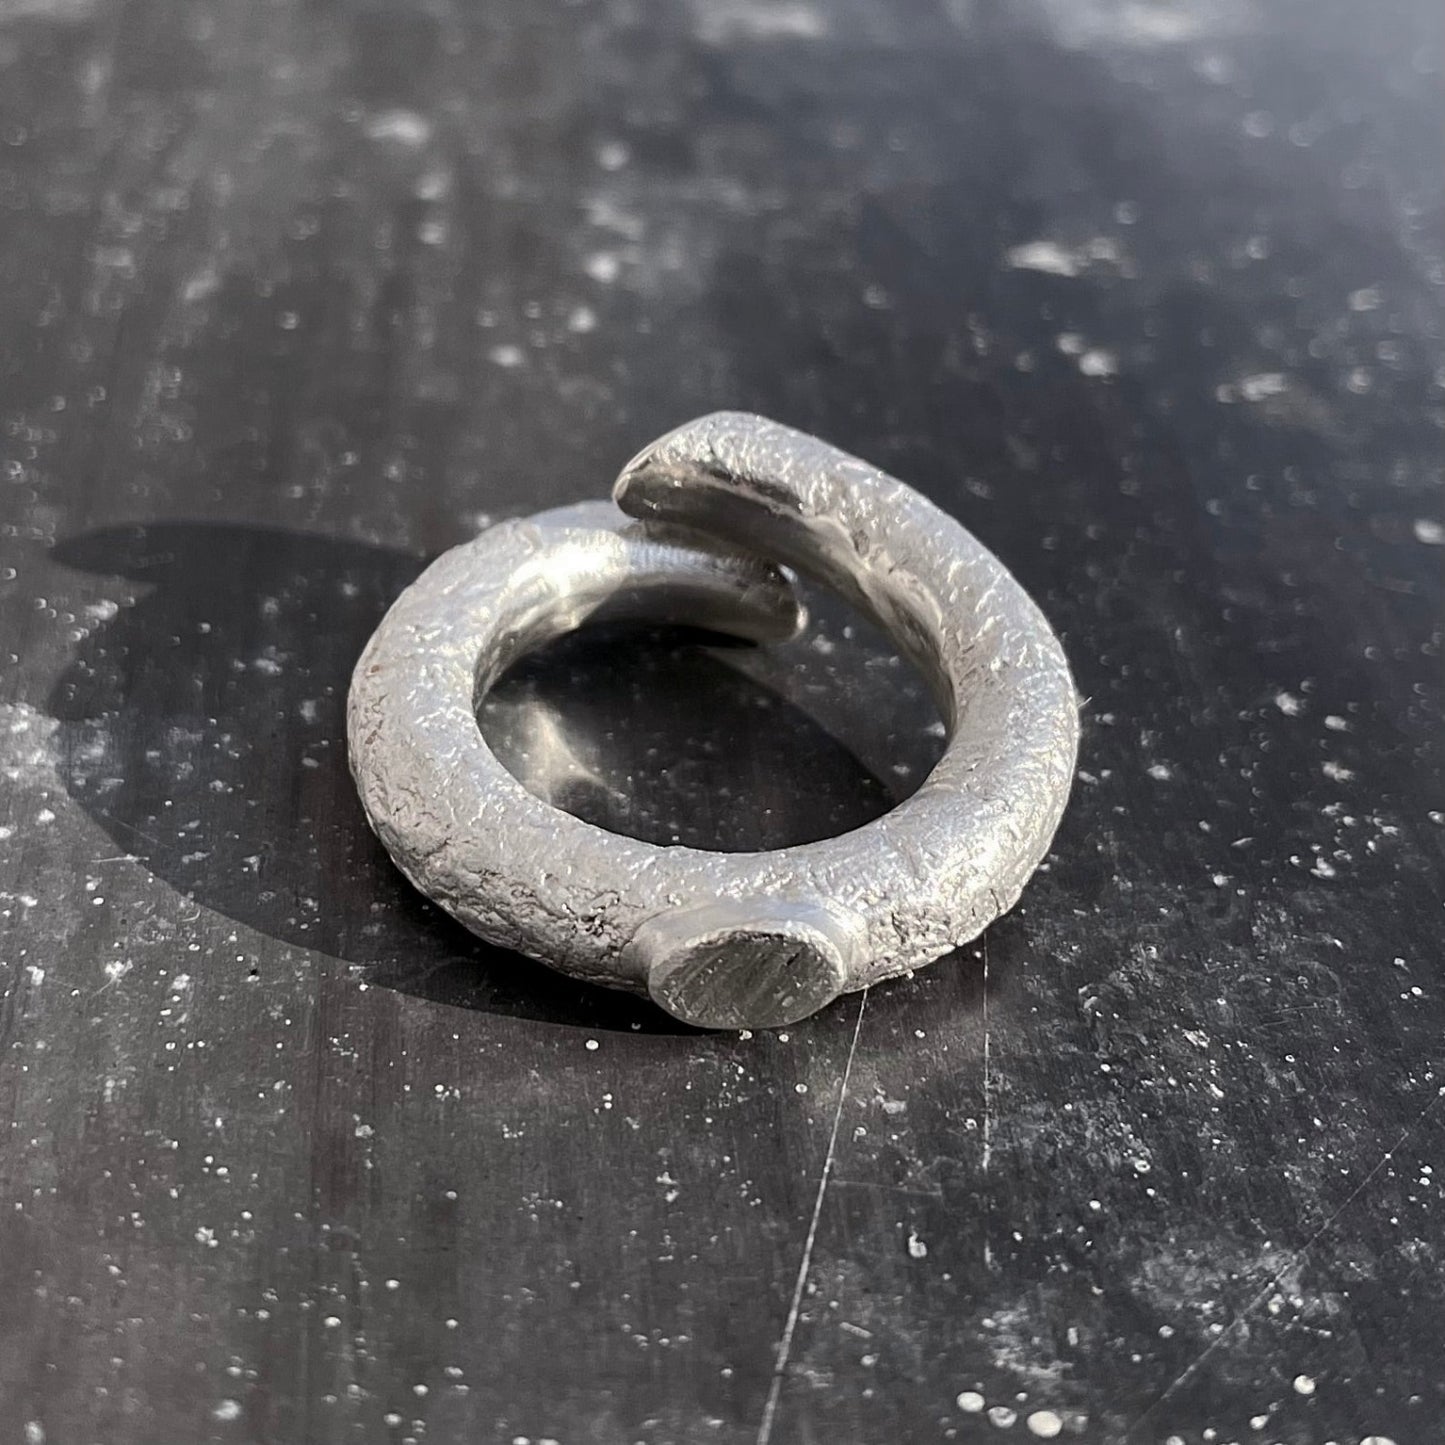 B1 ring - Silver - with rough surface structure